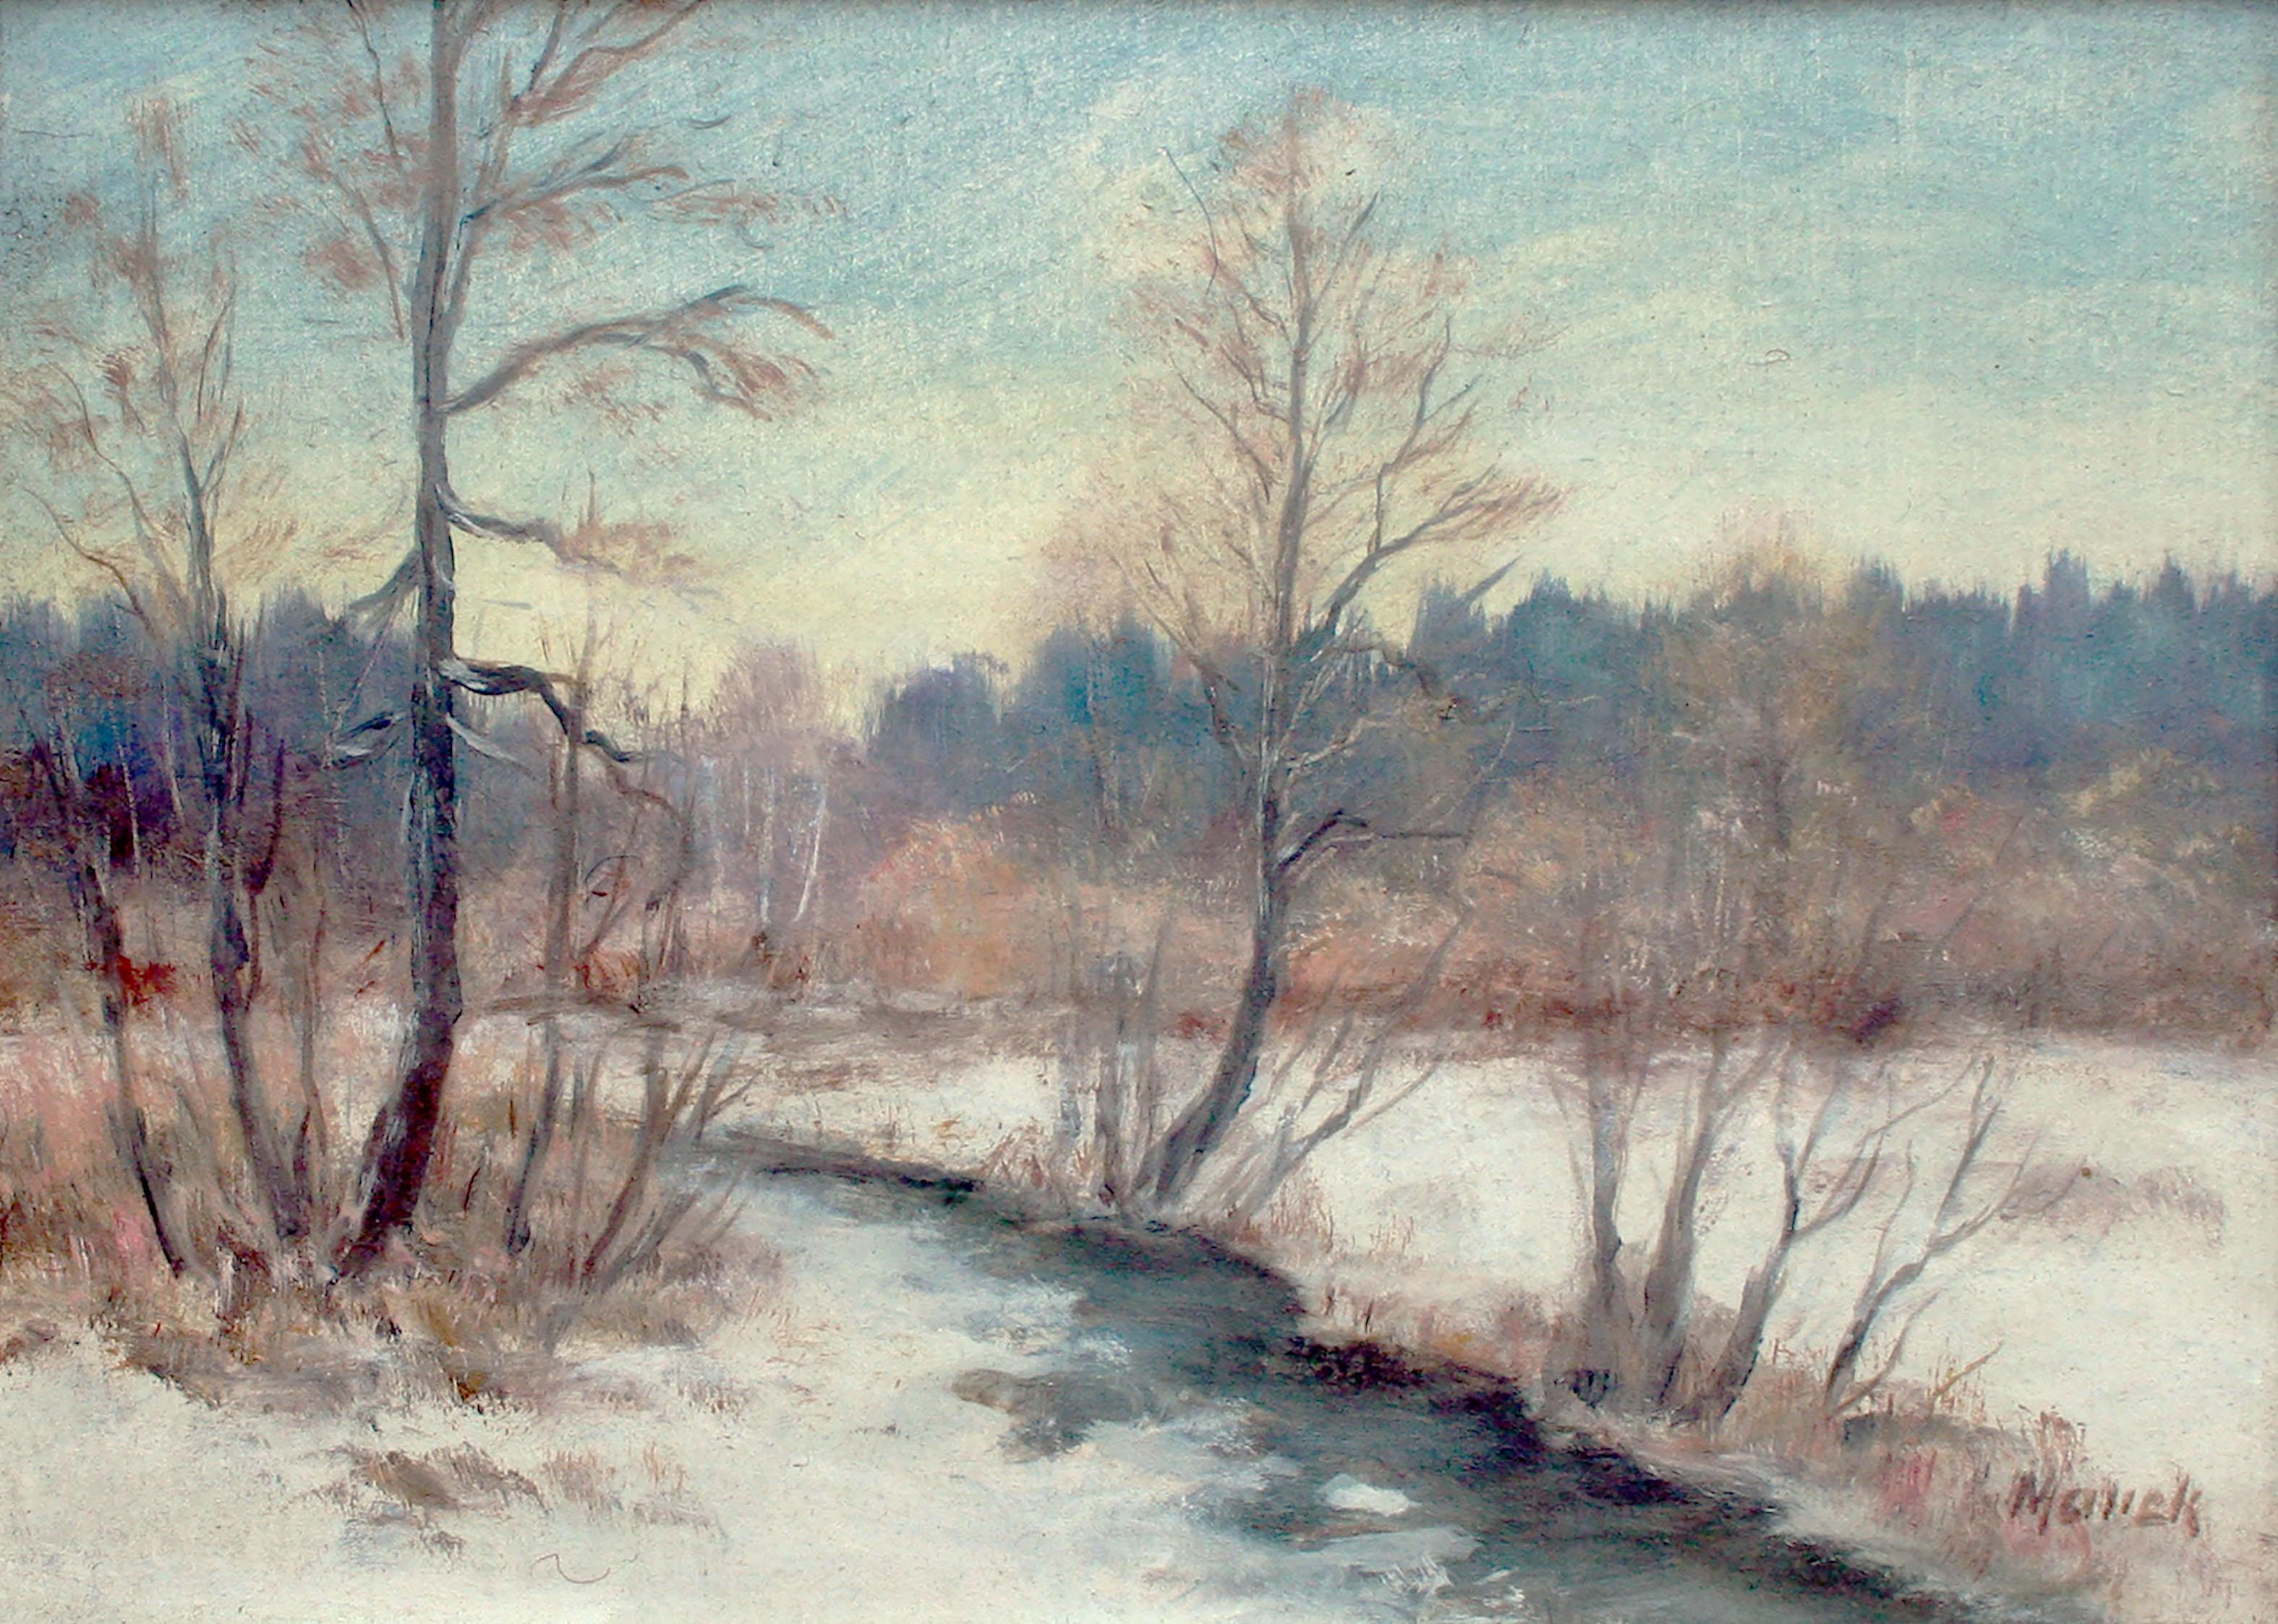 1970's Winter Landscape -- River in the Snow - Painting by Unknown